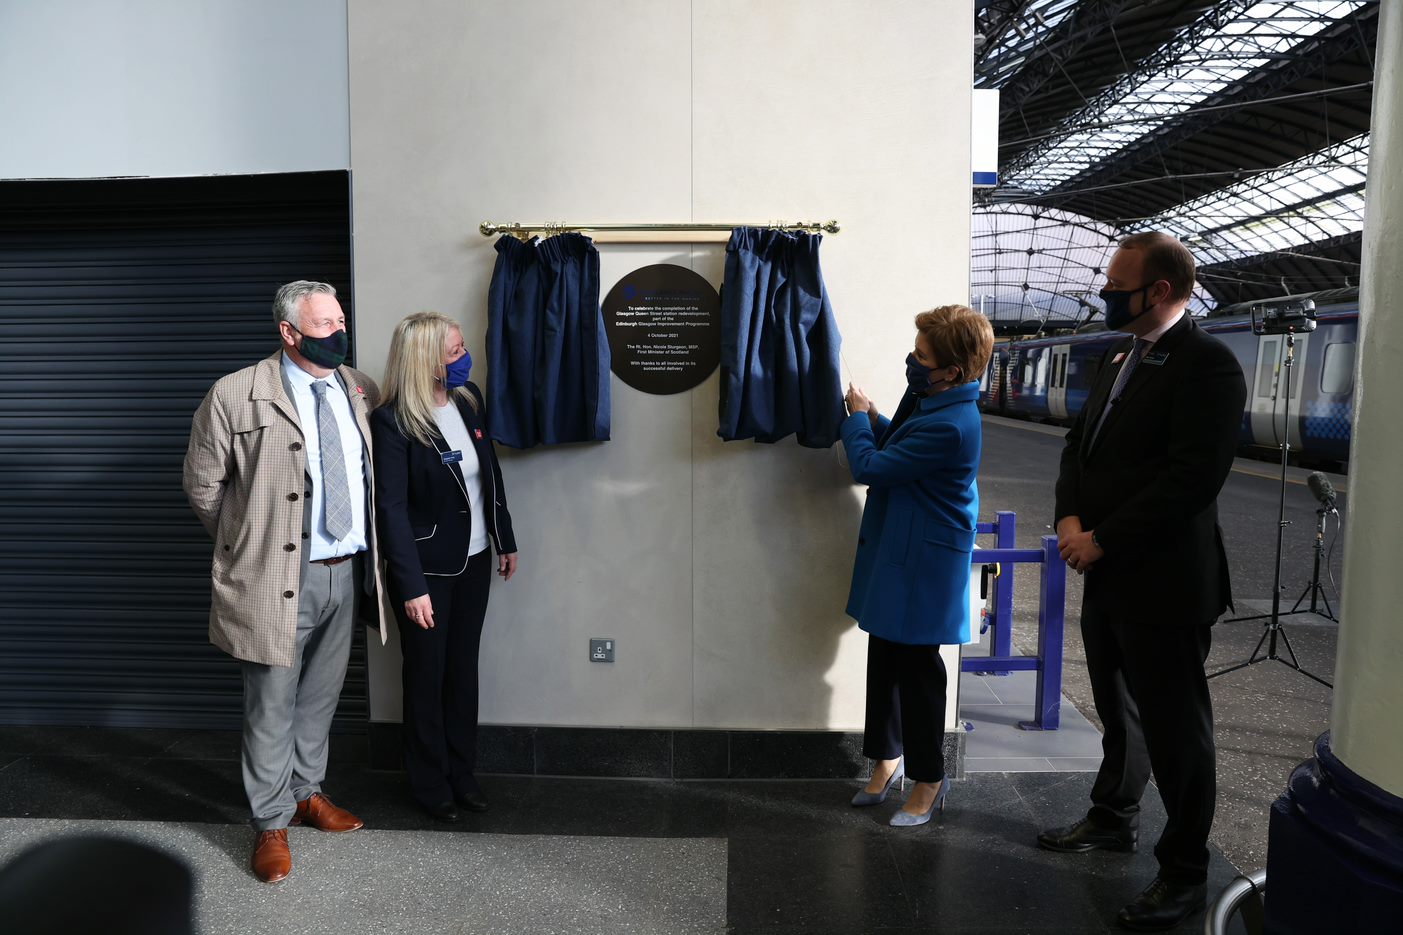 First Minister marks completion of £120m Glasgow Queen Street rebuild